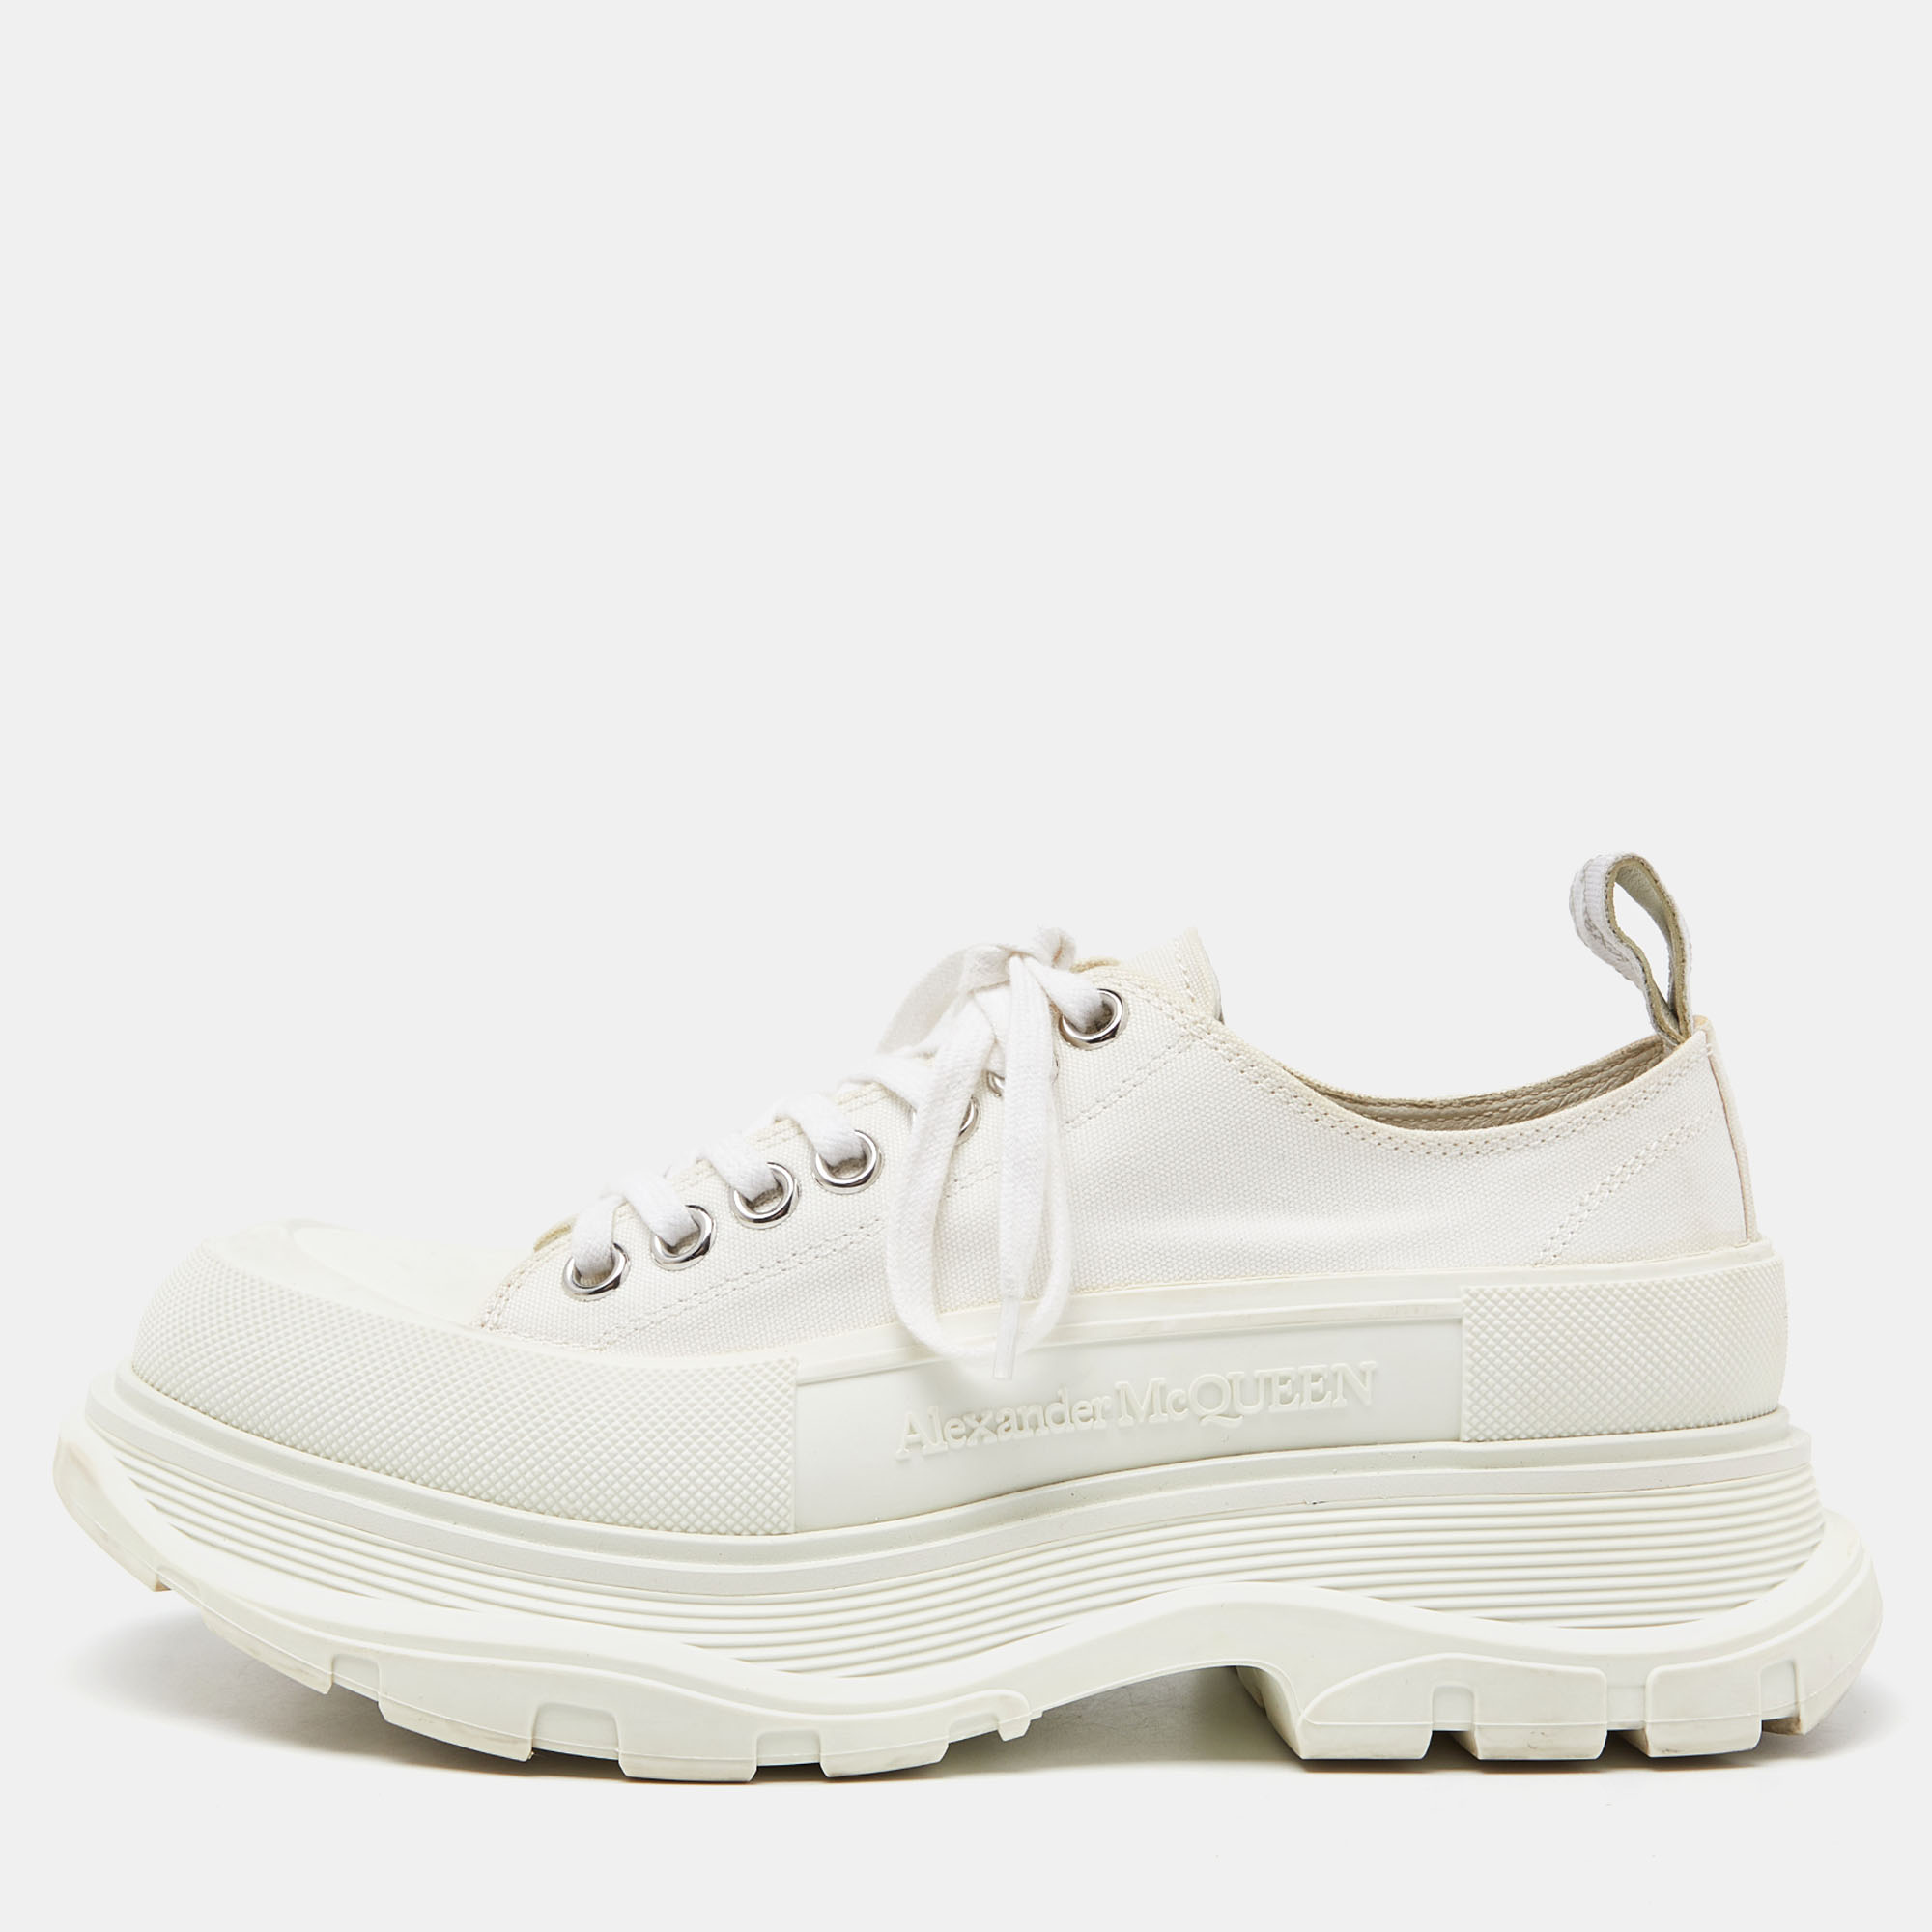 

Alexander McQueen White Canvas and Rubber Tread Slick Lace Up Sneakers